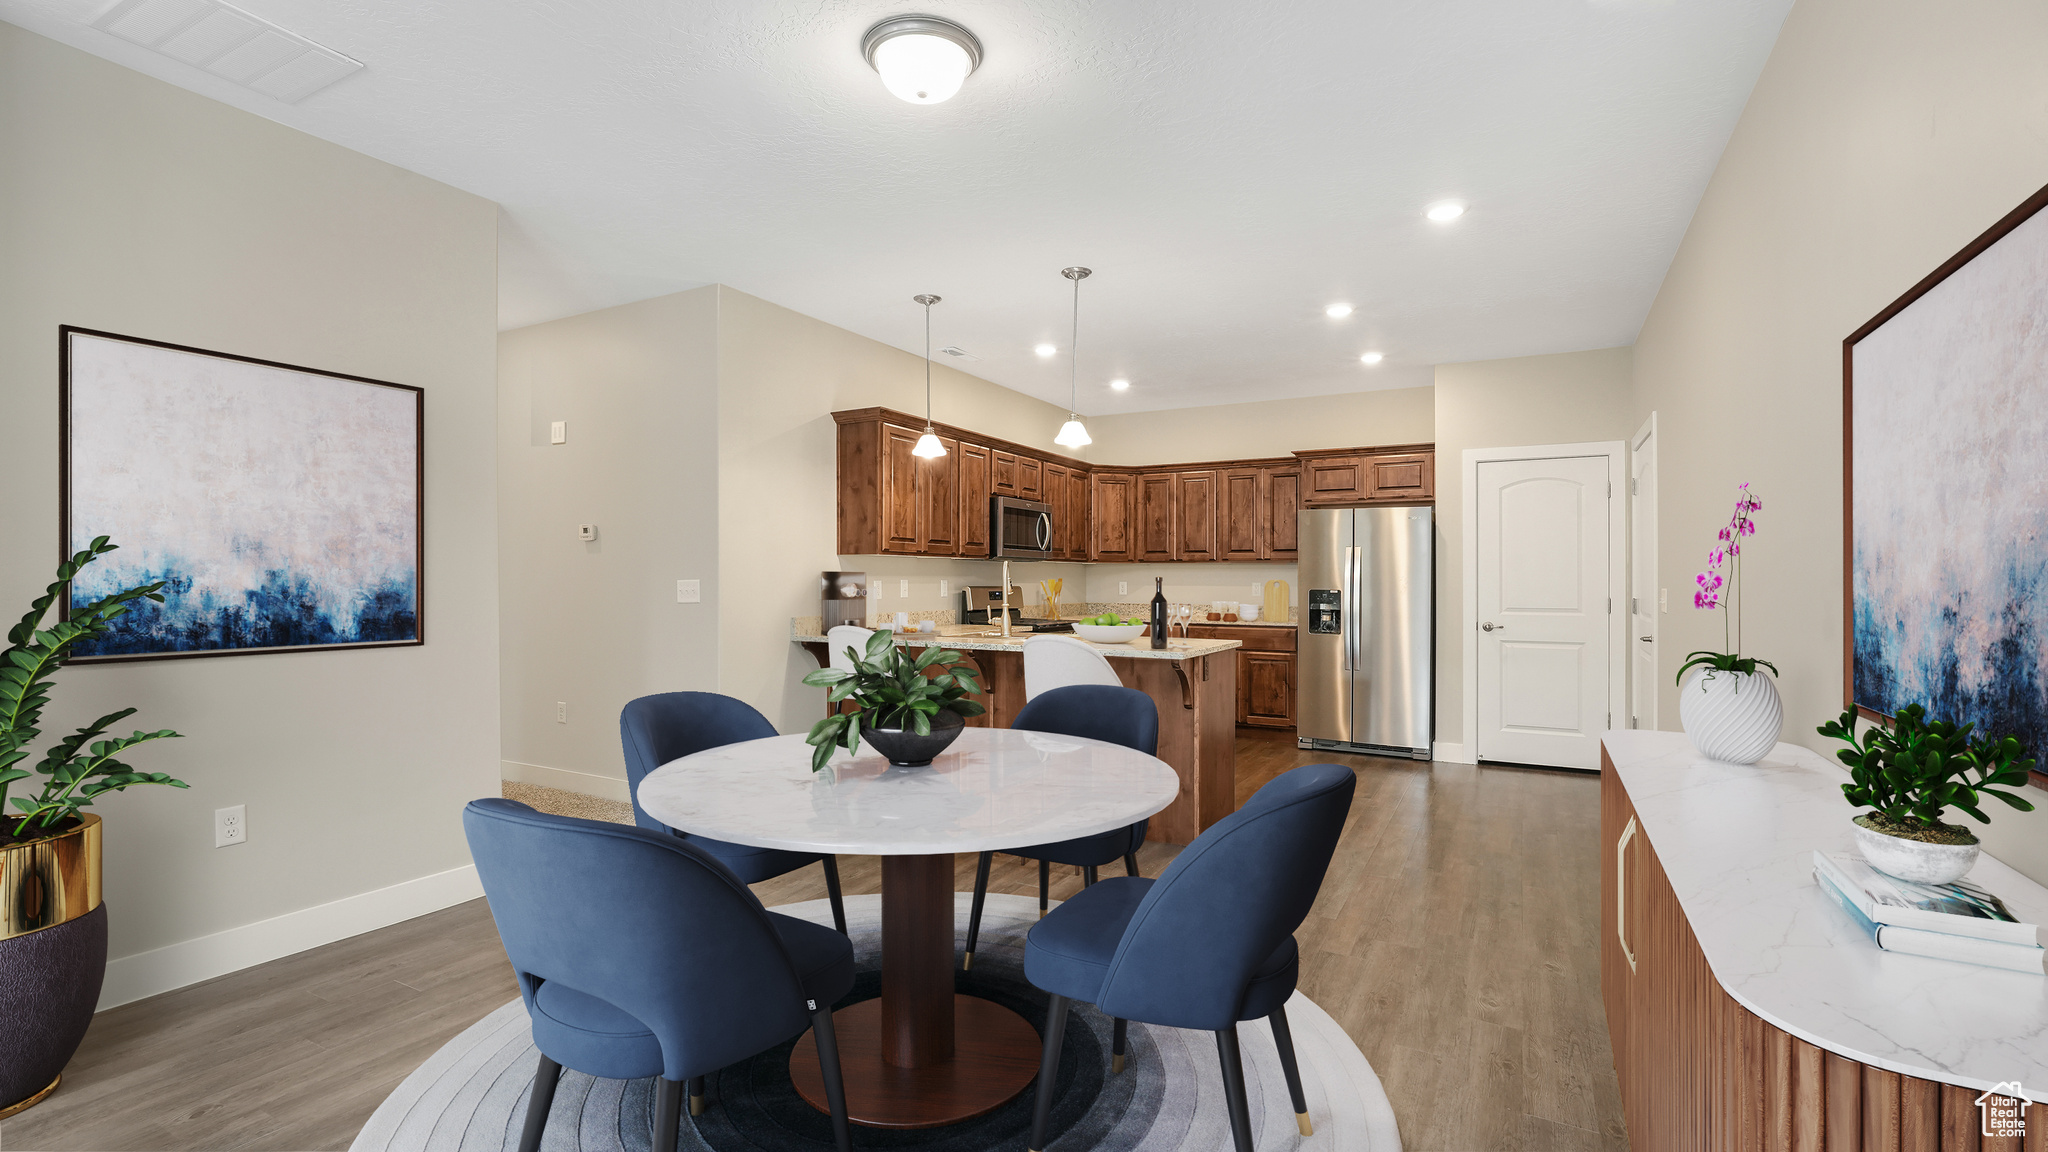 Open floor plan dining and kitchen